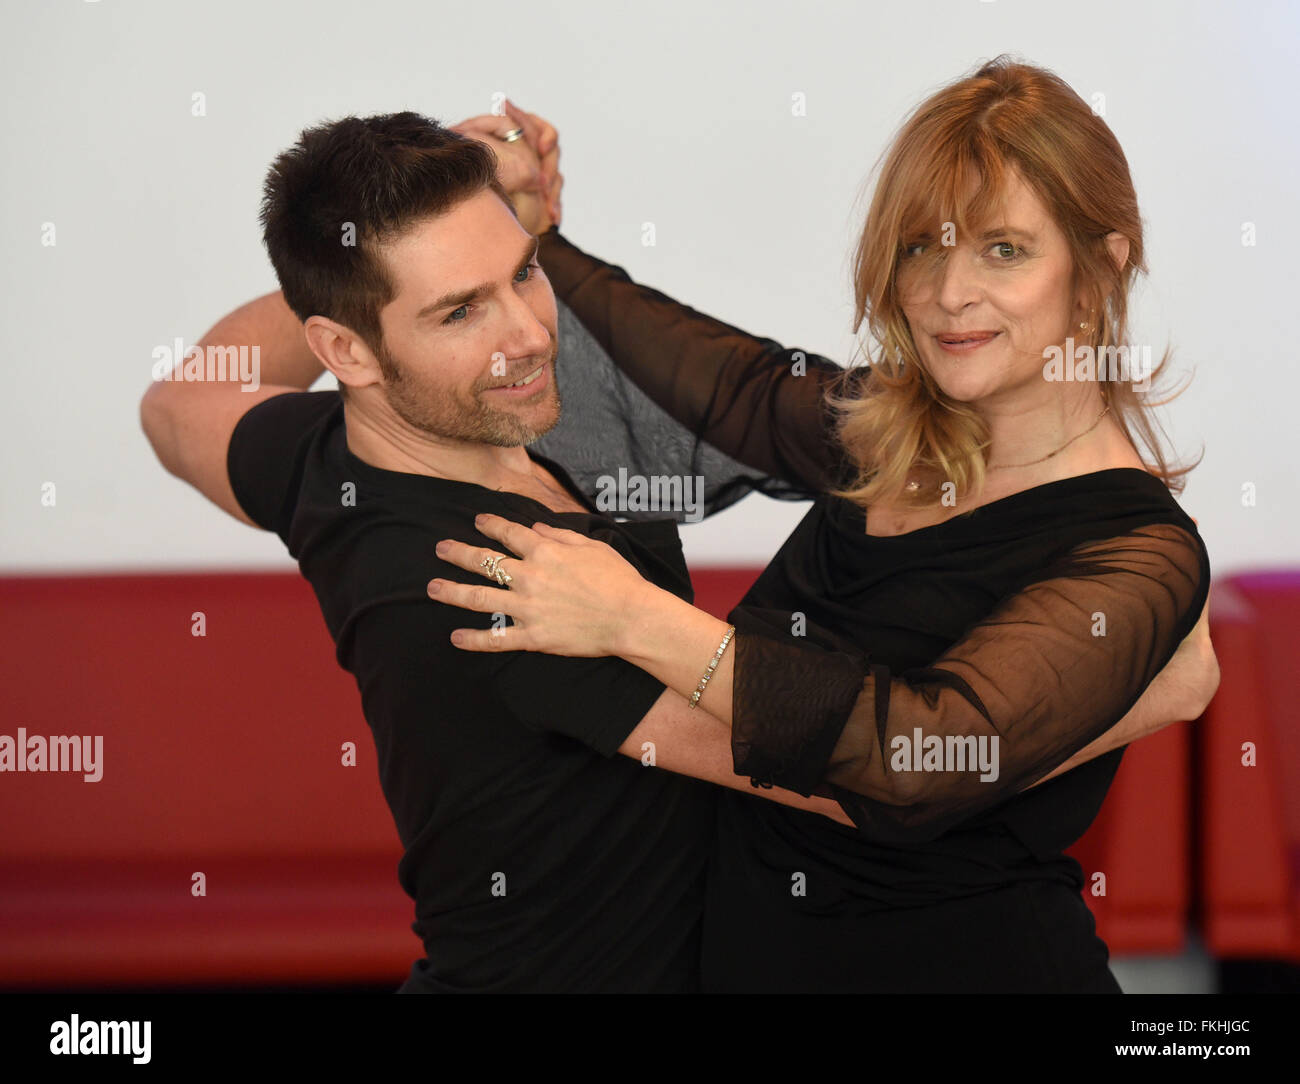 Cologne, Germany. 09th Mar, 2016. Dancer Christian Polanc and actress Nastassja Kinski pose during a photo call for the RTL dance show 'Let's Dance' in Cologne, Germany, 09 March 2016. Photo. HENNING KAISER/dpa/Alamy Live News Stock Photo